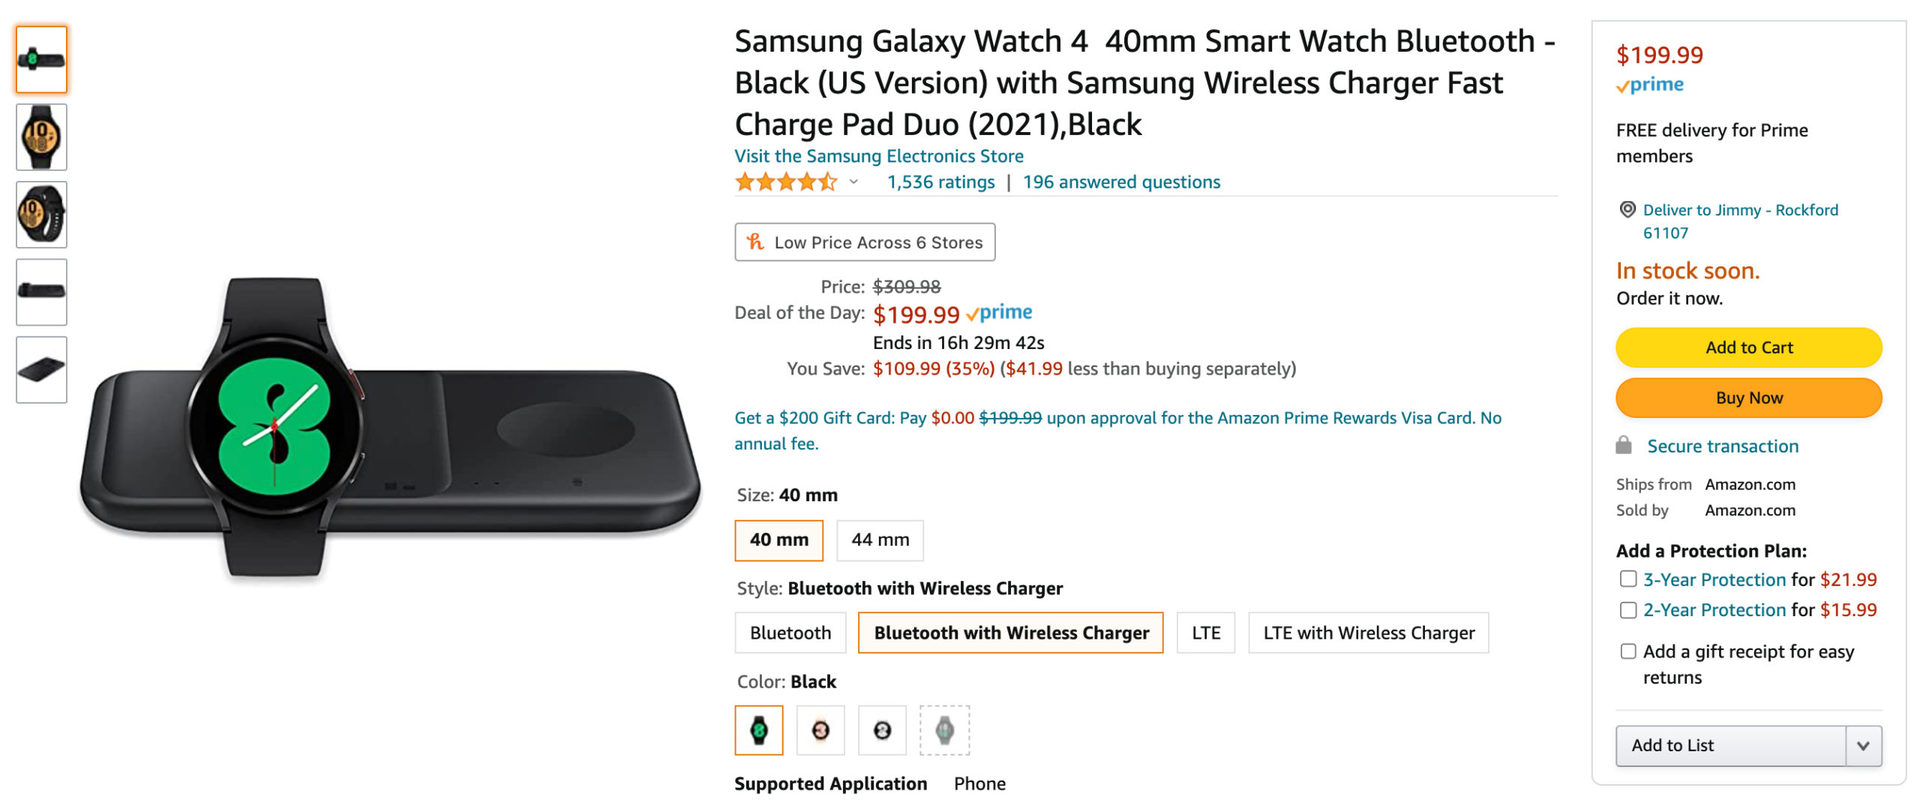 Samsung galaxy watch 4 and wireless charger duo cyber monday deal.jpg